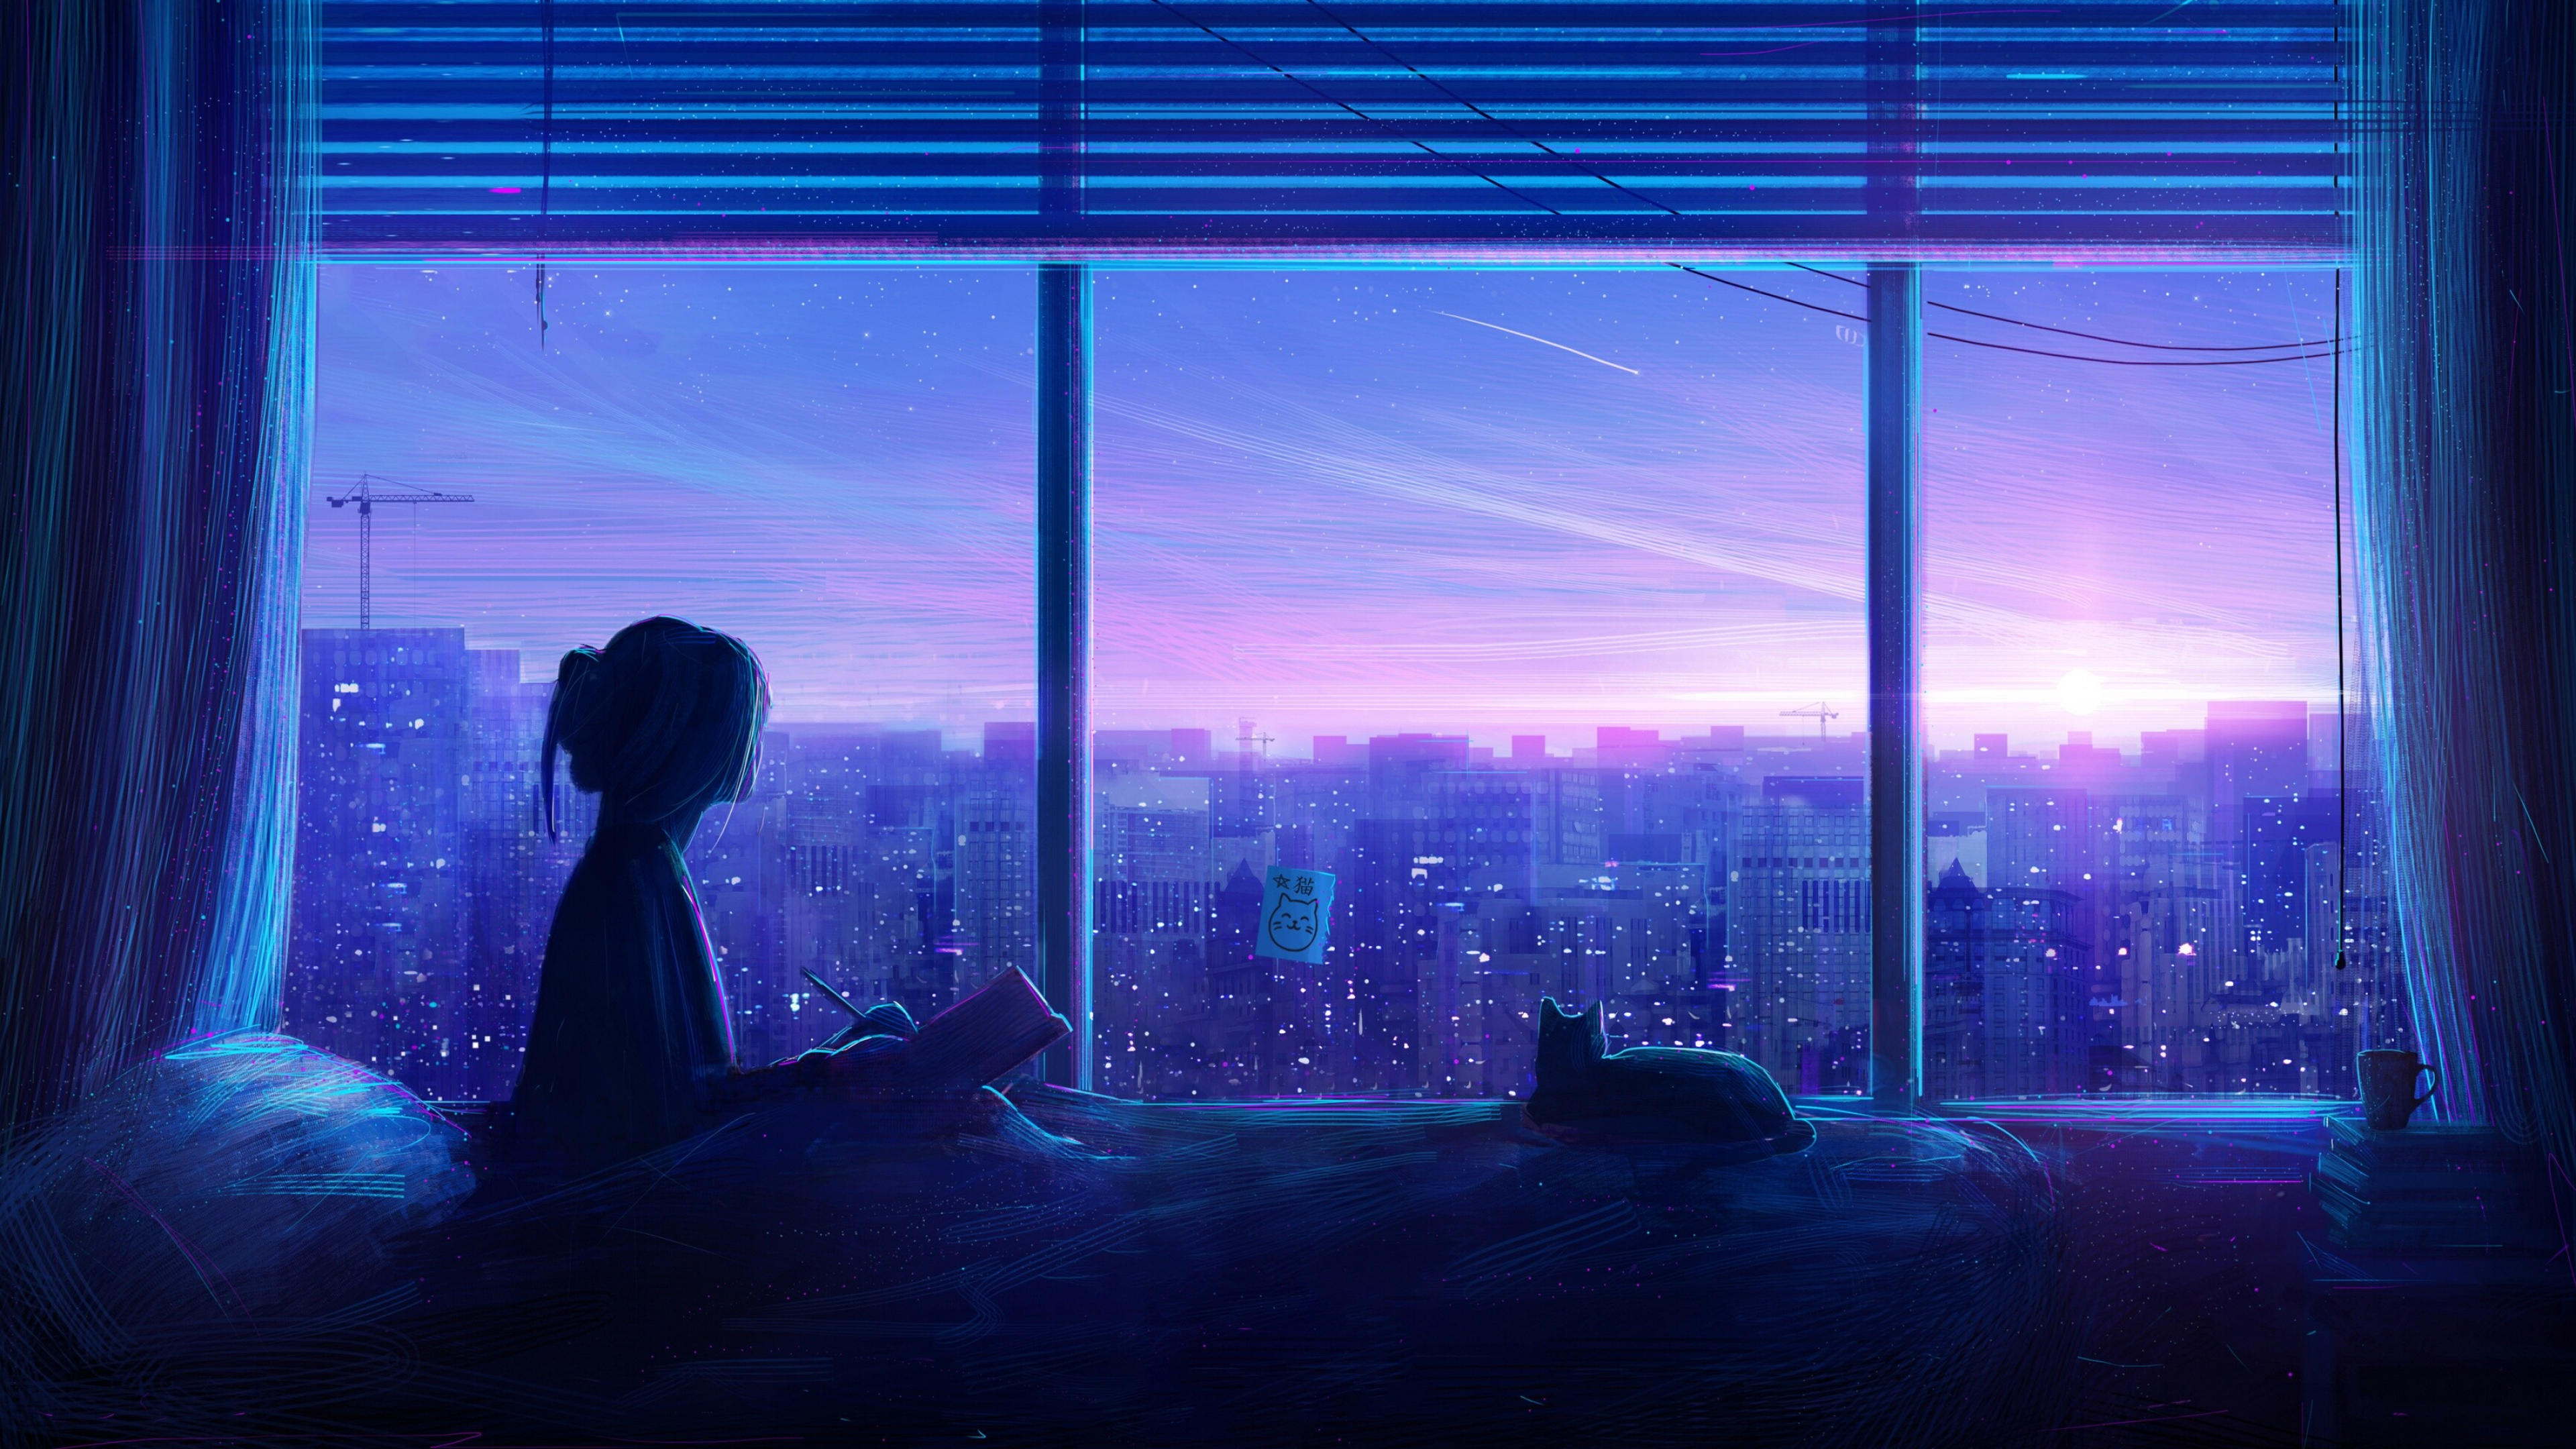 Girly: Atmospheric, The girl reading the book, The cat, Panoramic windows, Rising sun. 3840x2160 4K Background.